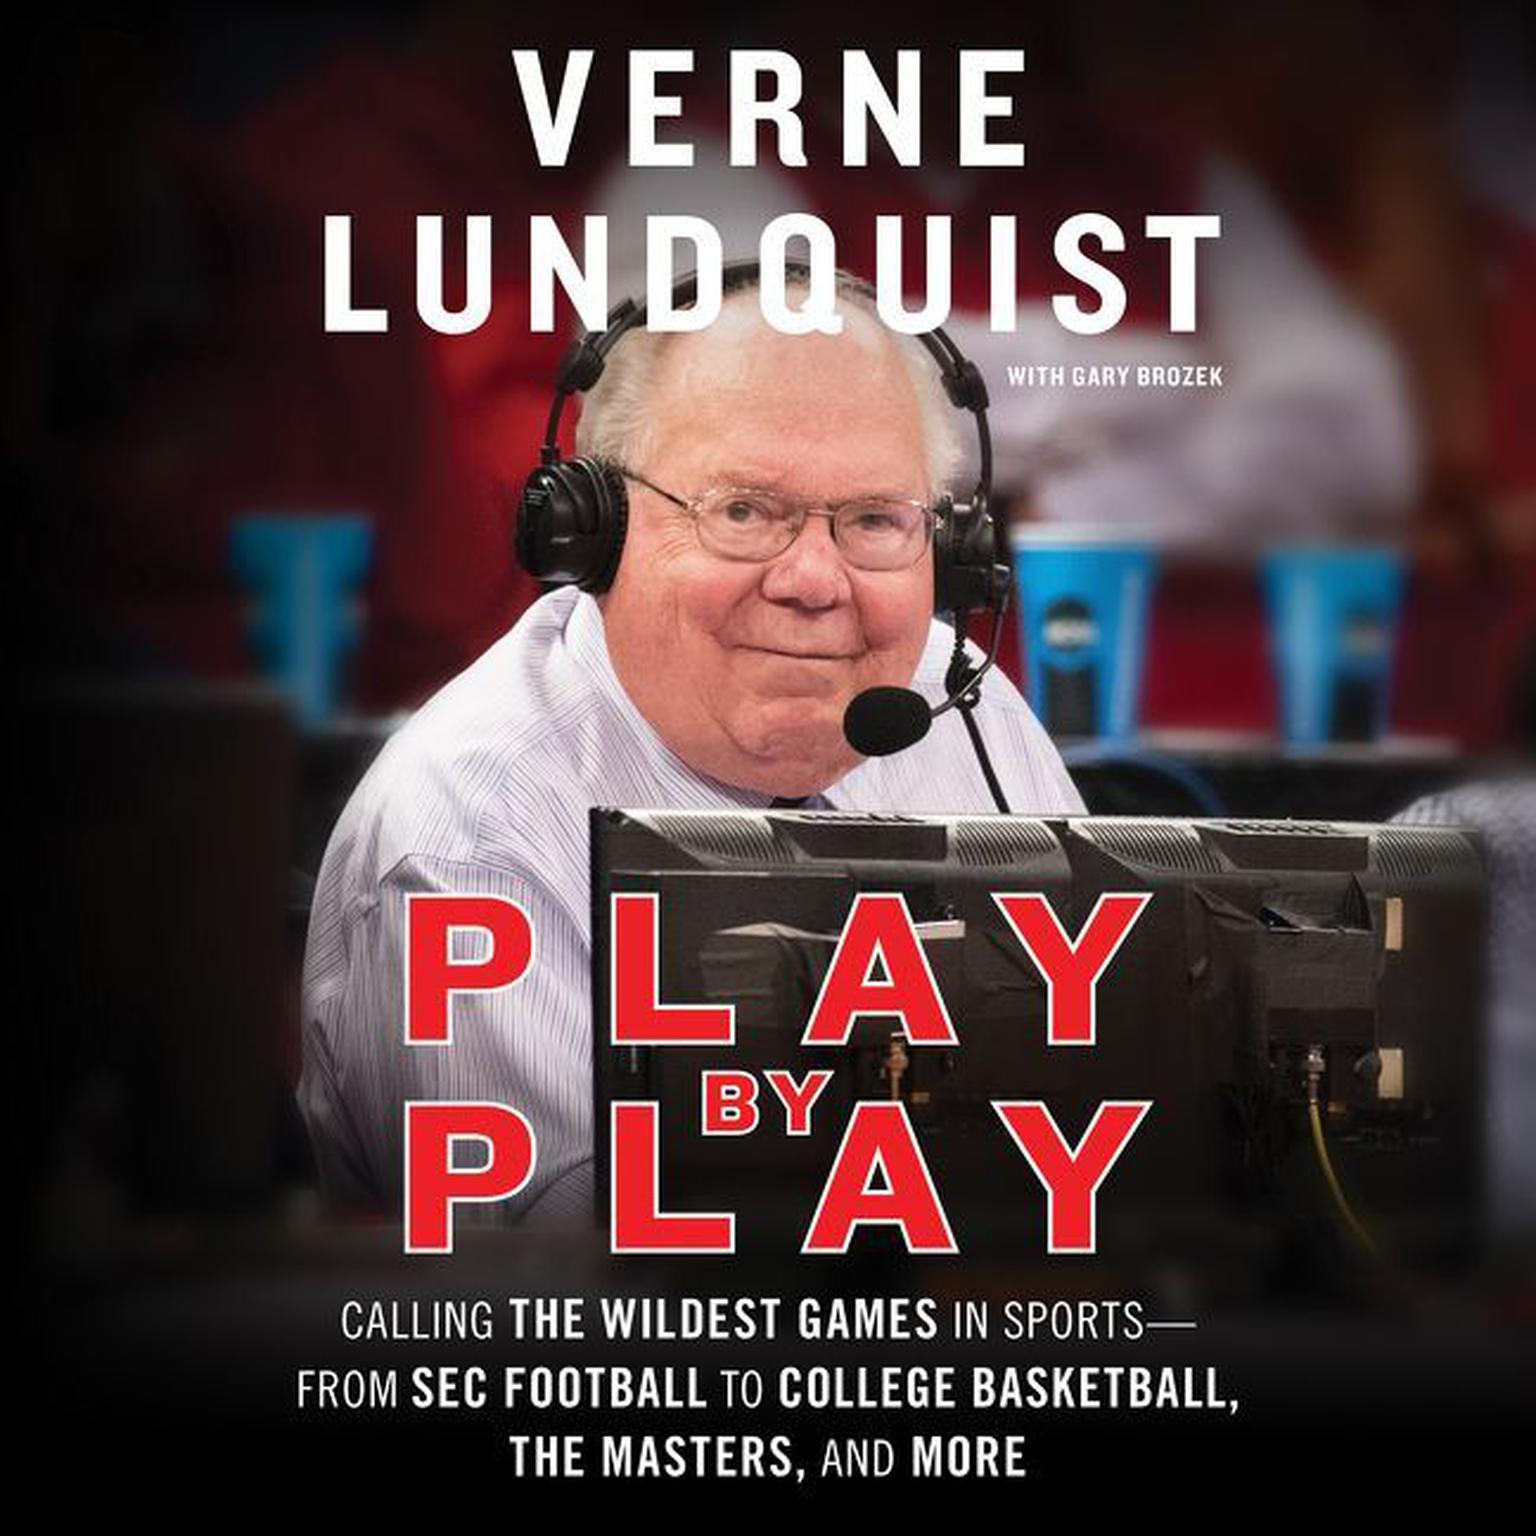 Play by Play: Calling The Wildest Games In Sports-From SEC Football to College Basketball, The Masters and More Audiobook, by Verne Lundquist